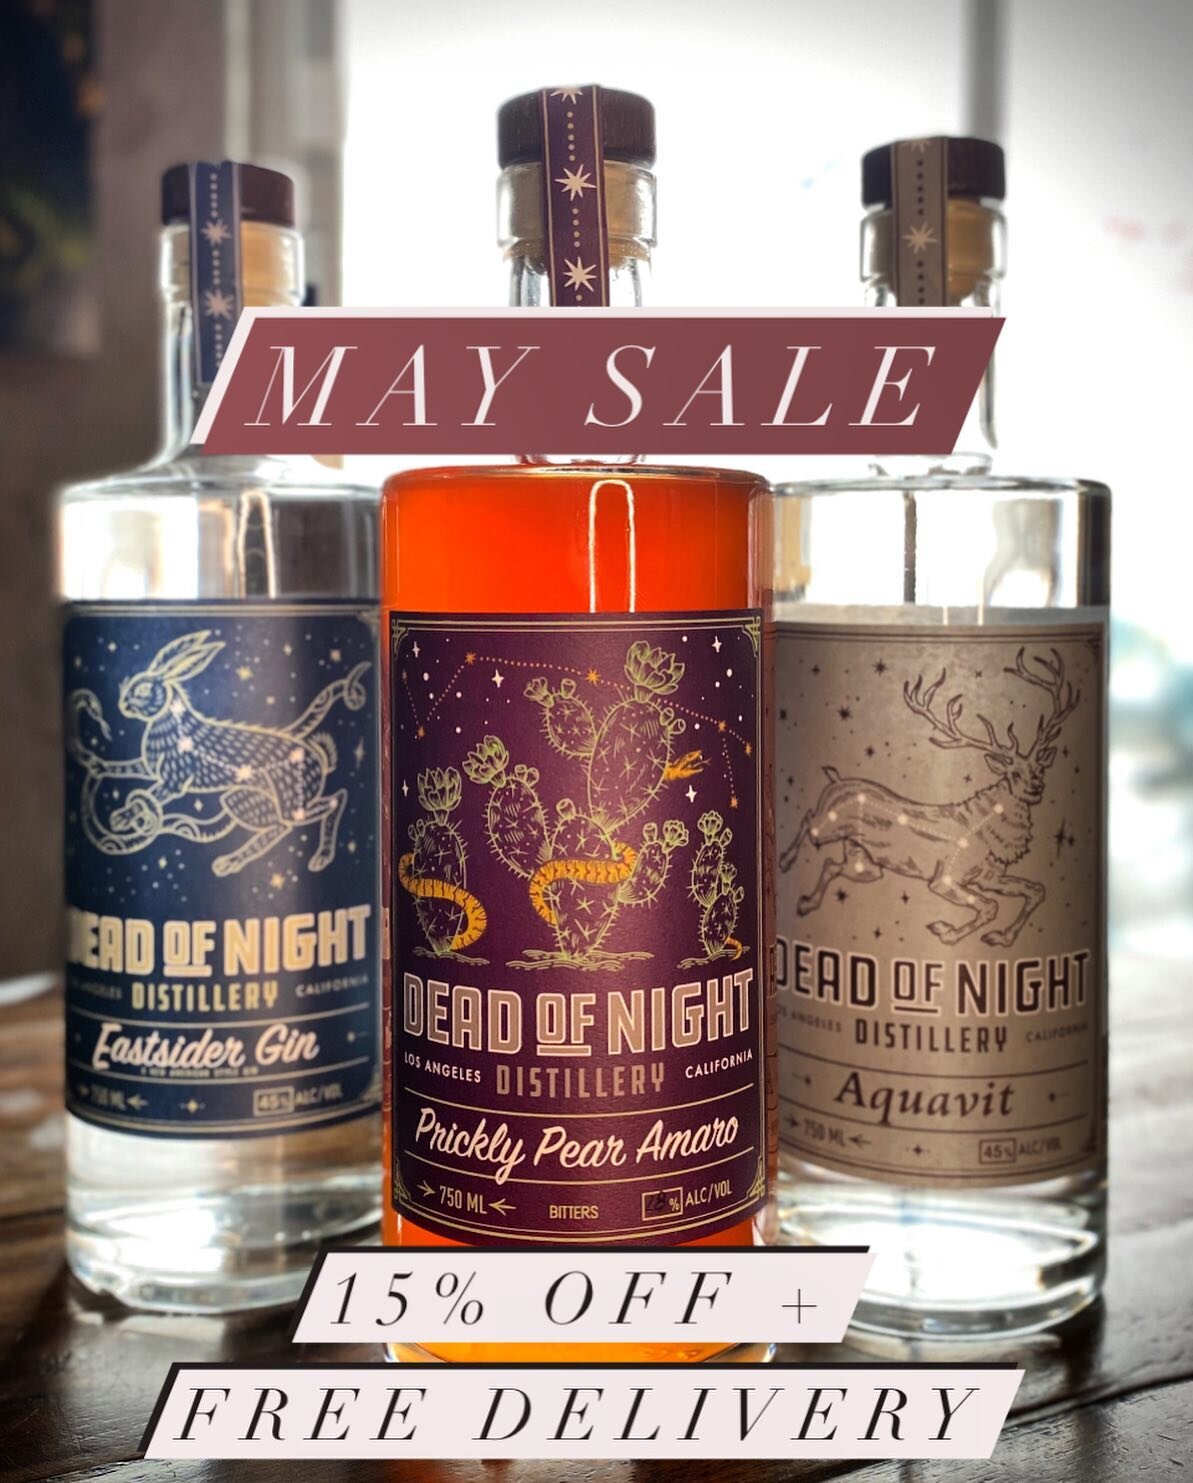 Sale runs from Mothers Day to Memorial Day!  Support your local craft distillery by picking up a bottle or two!!

15% off and free delivery for orders over 75$. 

Use code MEMORIALDAY